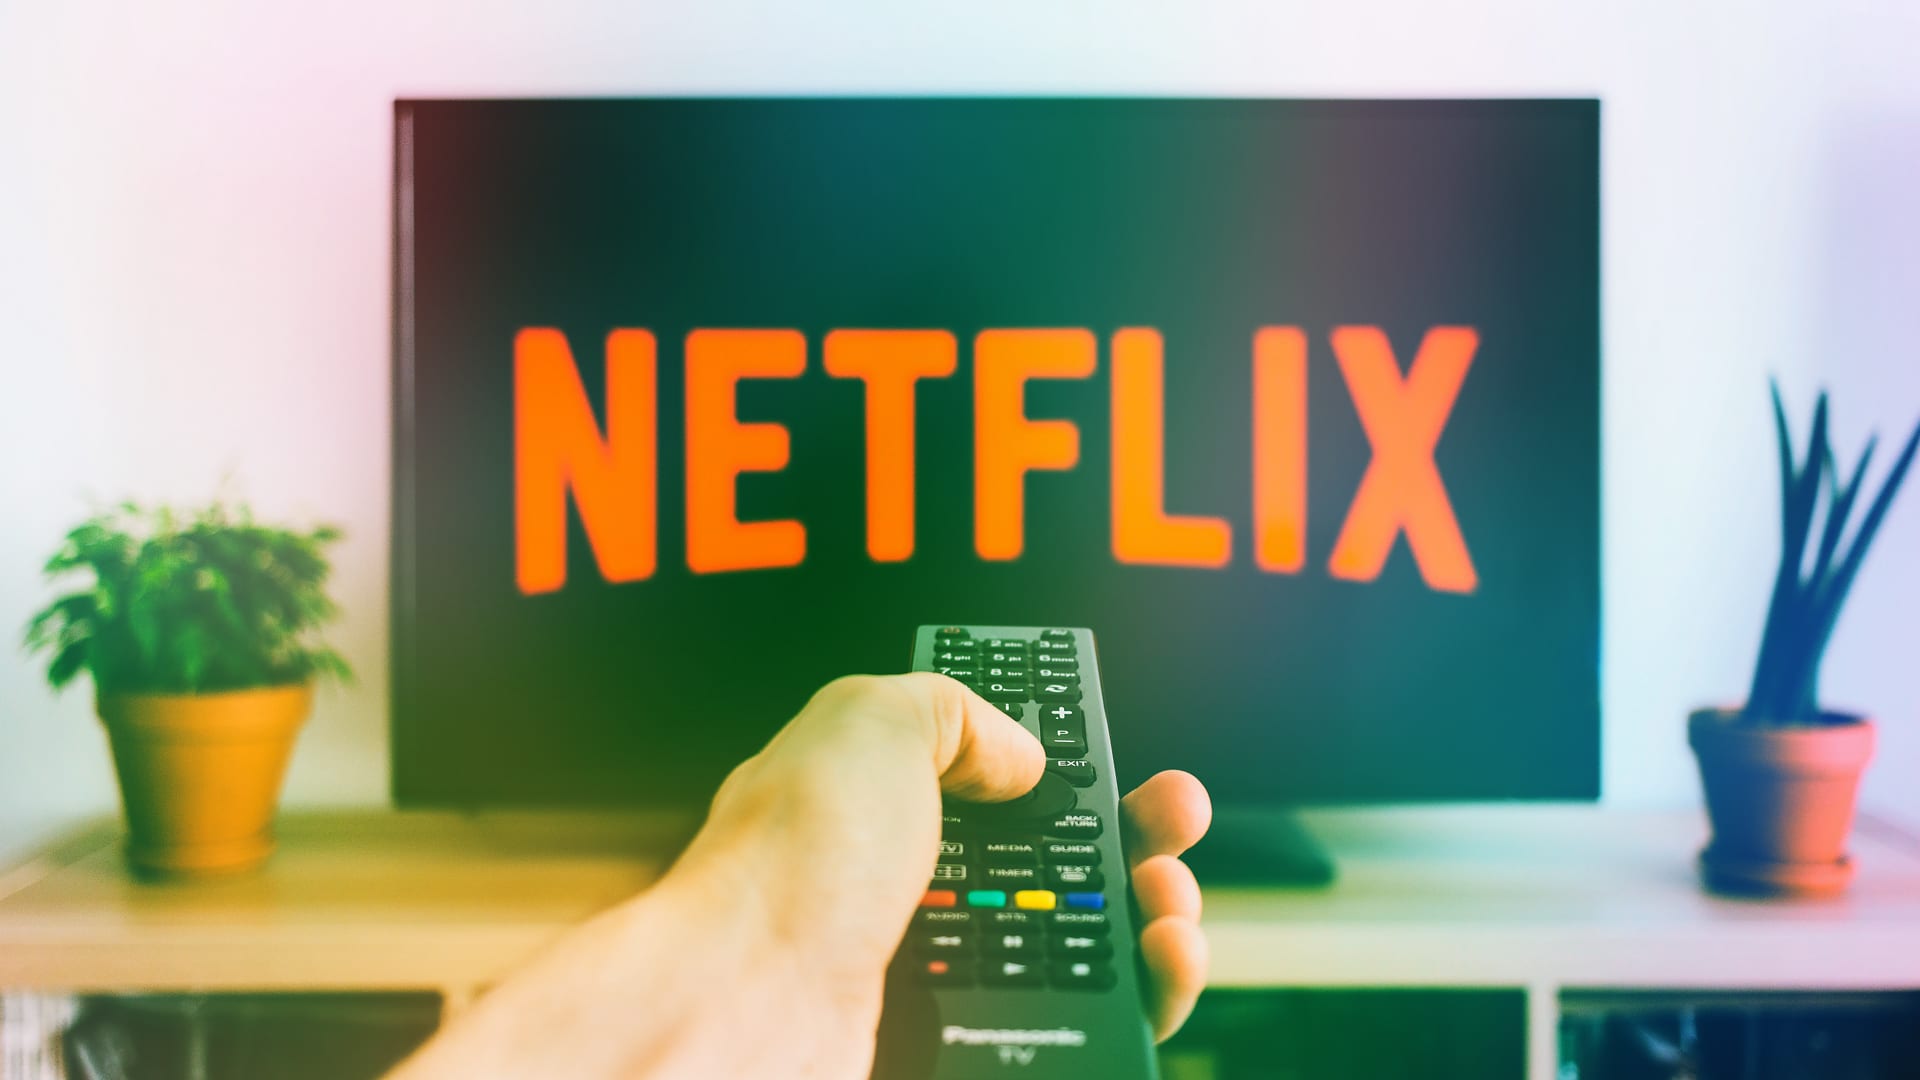 Netflix consumes 15% of the world’s global internet traffic